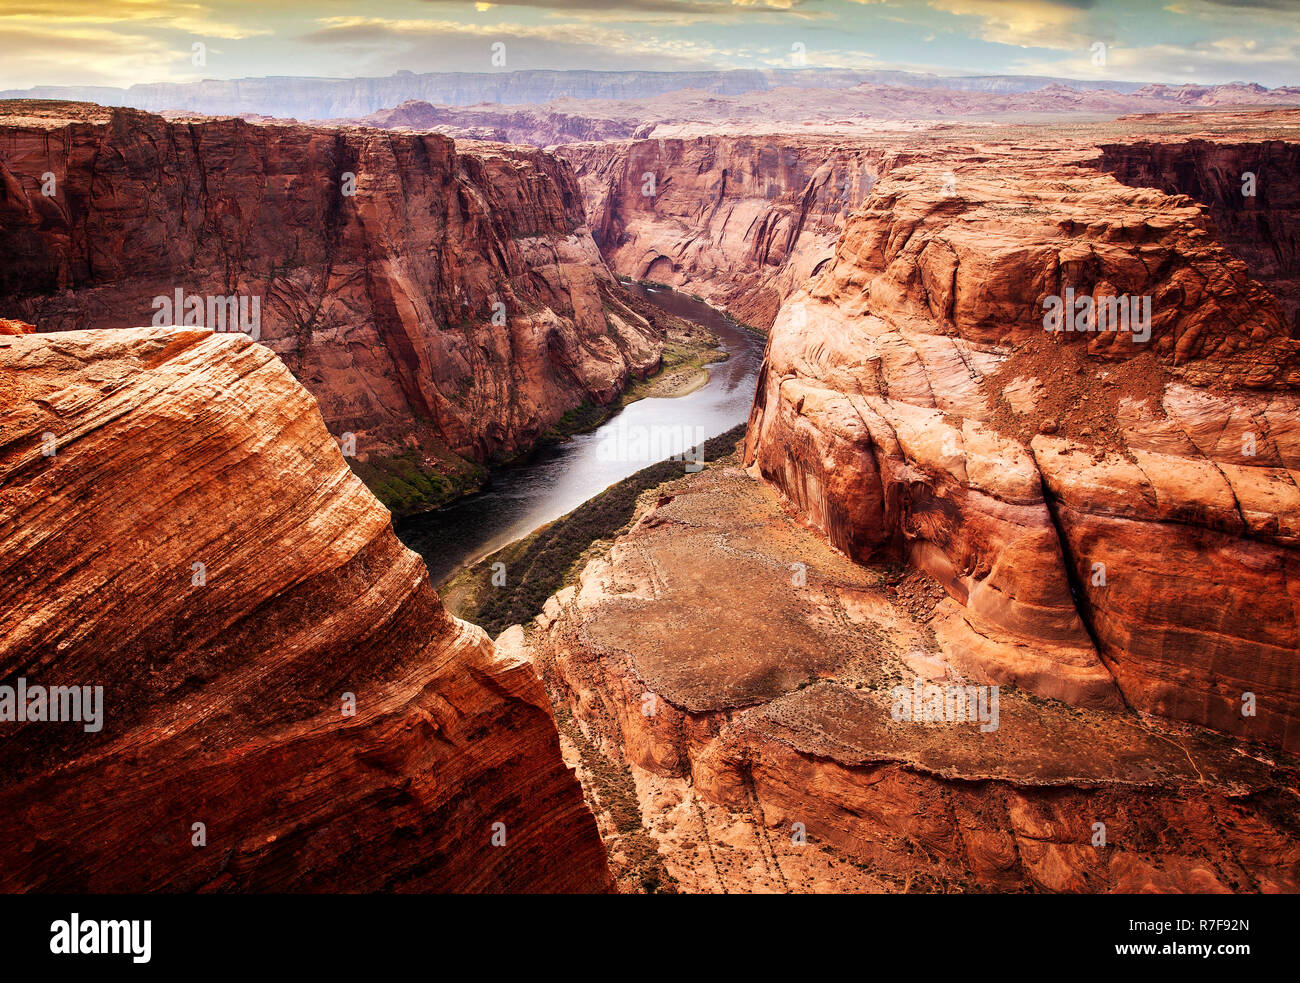 Looking down river from Horseshoe Bend on the Colorado River near Page, Arizona. Stock Photo